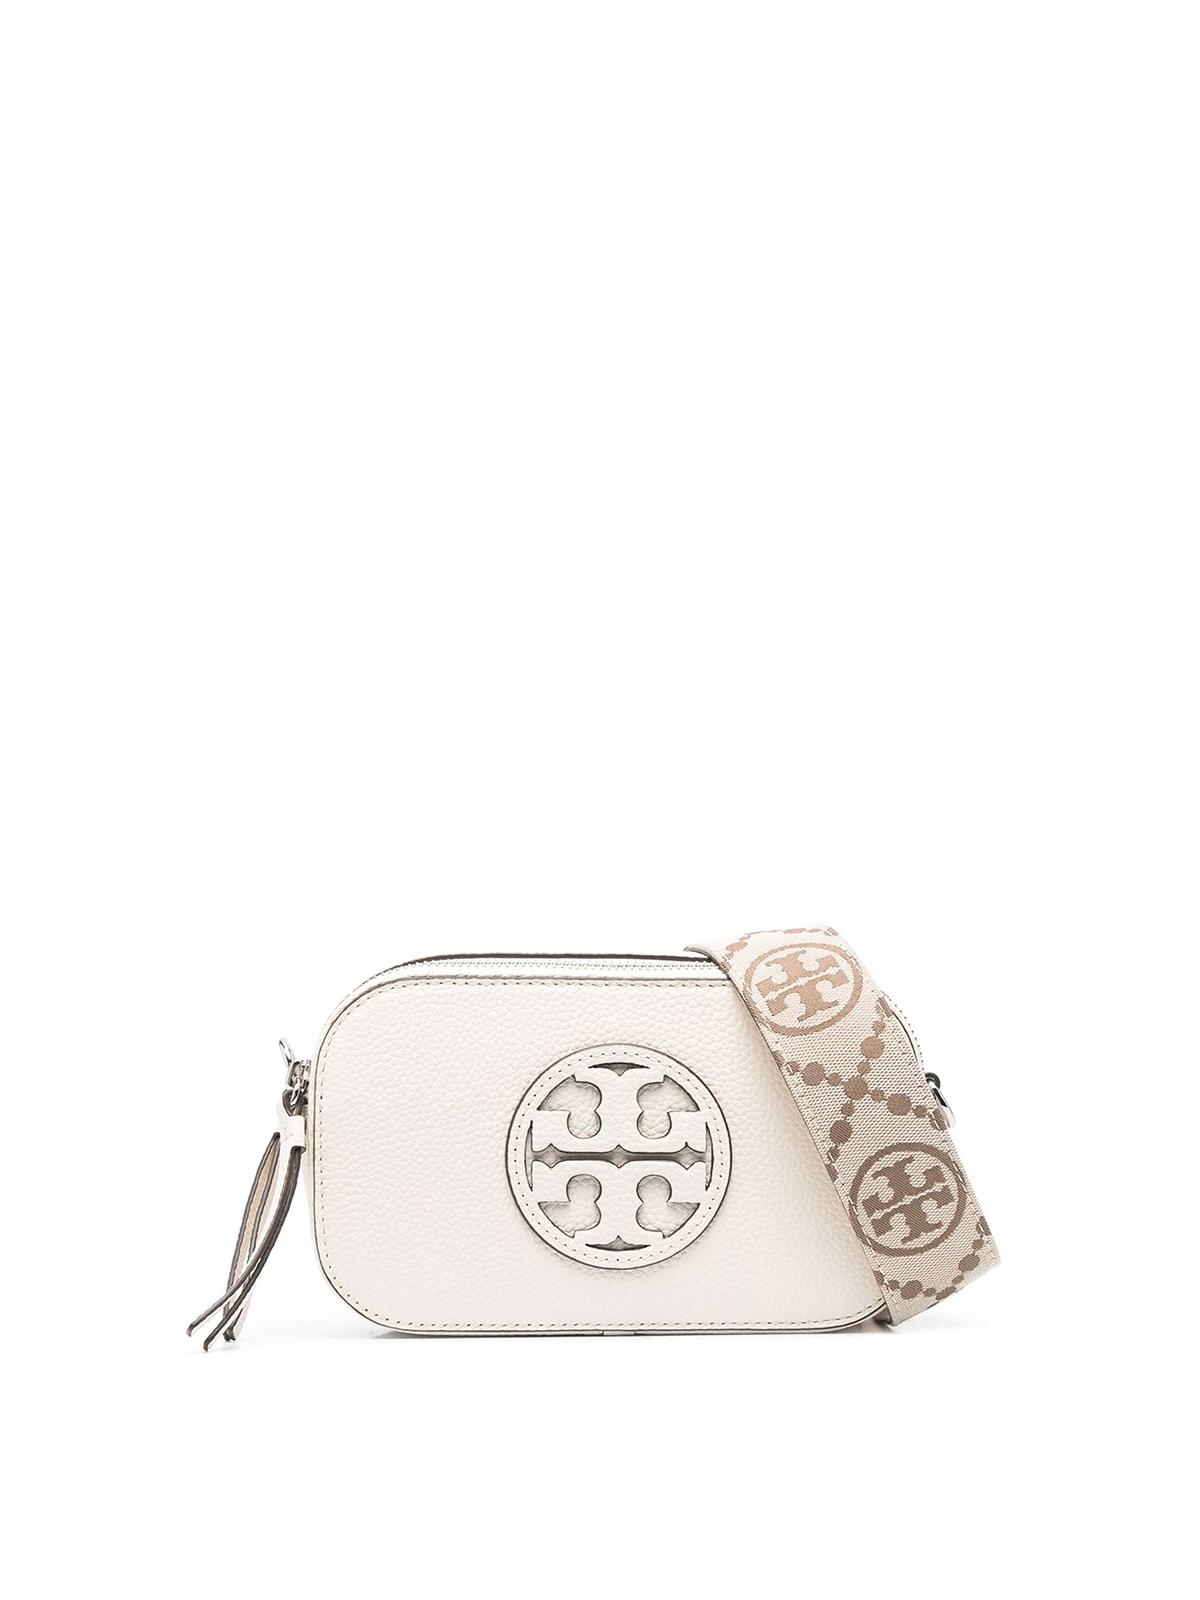 Previously owned Tory Burch Miller nano crossbody. Fits your cards